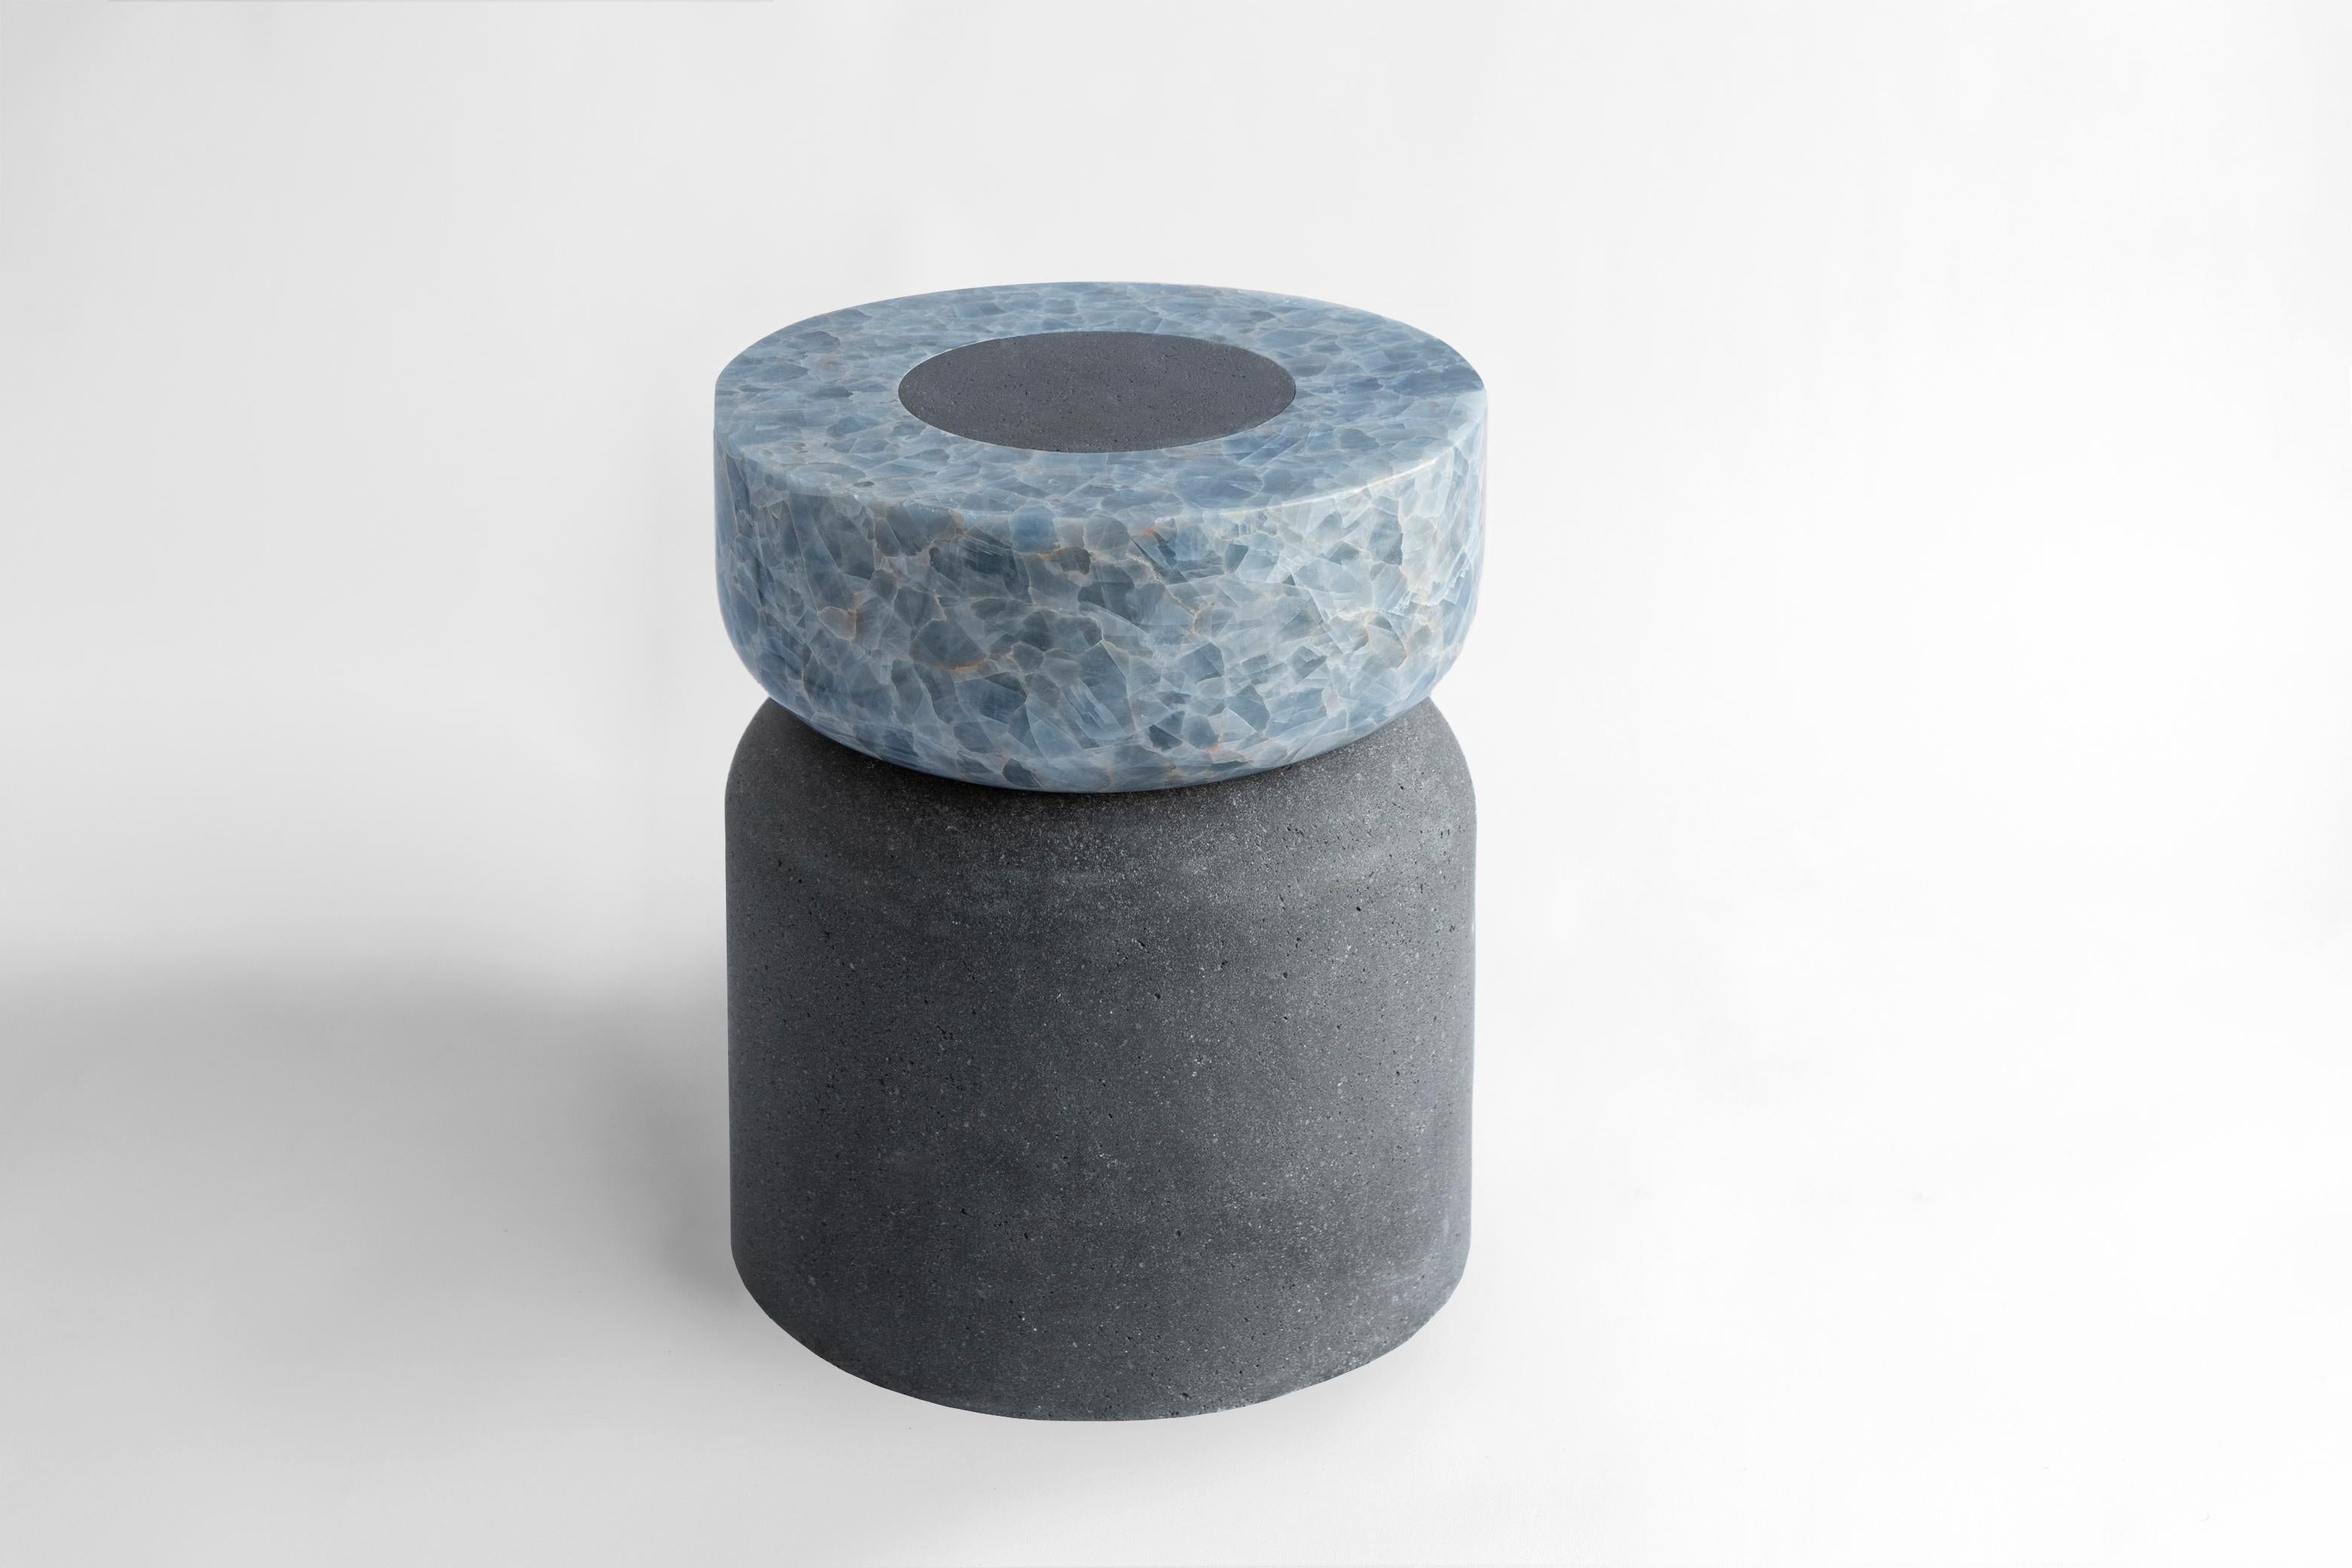 Stone Volcanic Shade IV Stool/Table by Sten Studio, Represented by Tuleste Factory